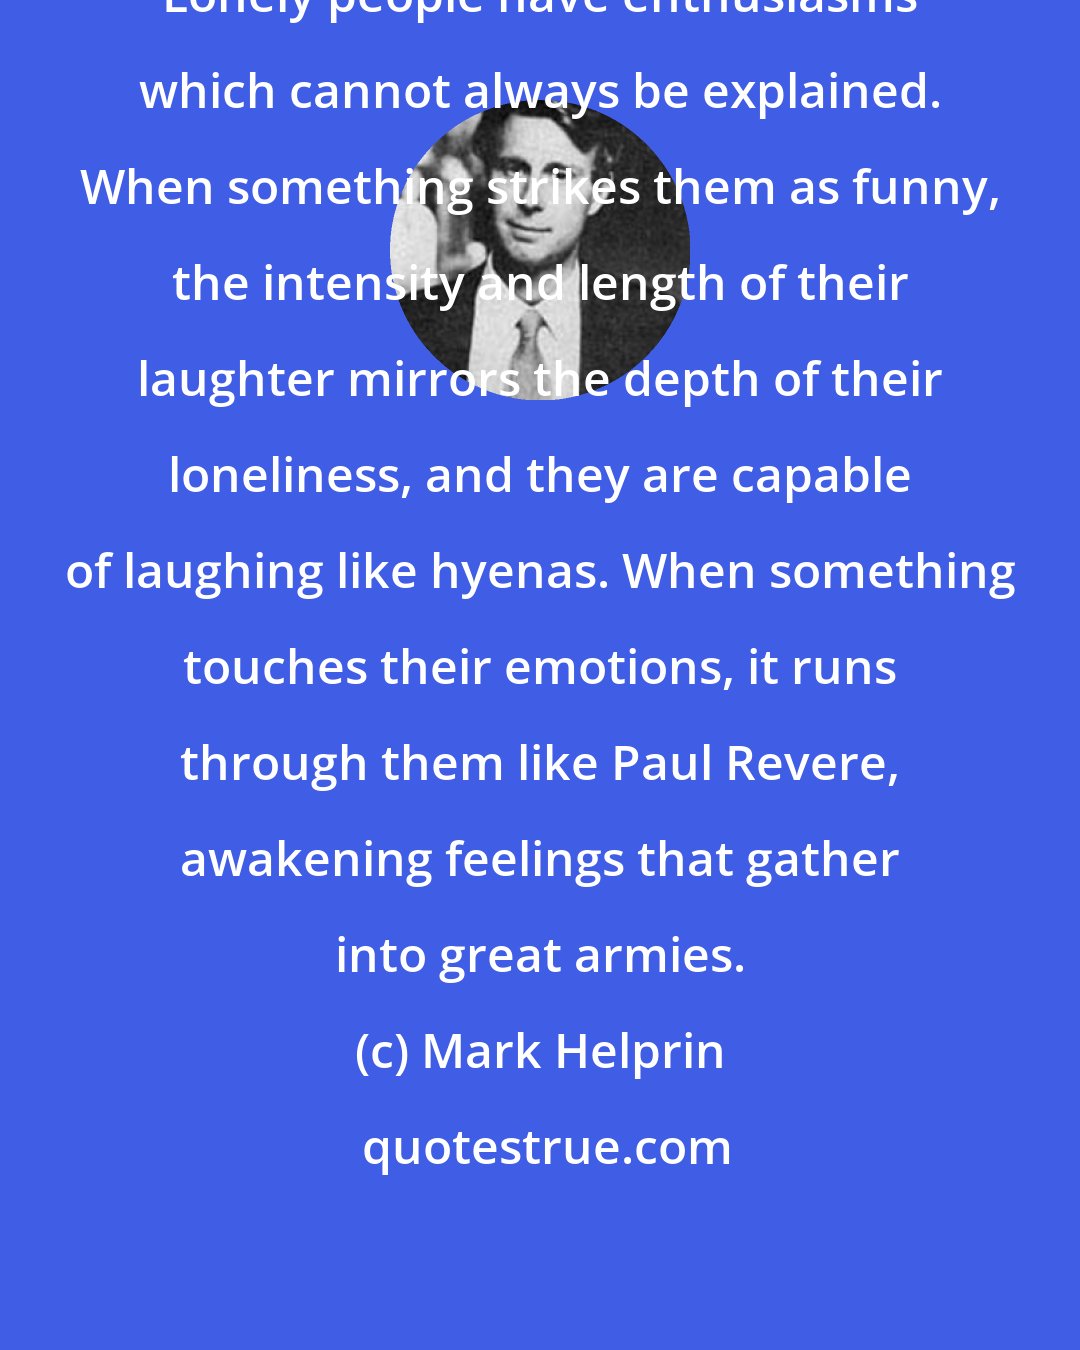 Mark Helprin: Lonely people have enthusiasms which cannot always be explained. When something strikes them as funny, the intensity and length of their laughter mirrors the depth of their loneliness, and they are capable of laughing like hyenas. When something touches their emotions, it runs through them like Paul Revere, awakening feelings that gather into great armies.